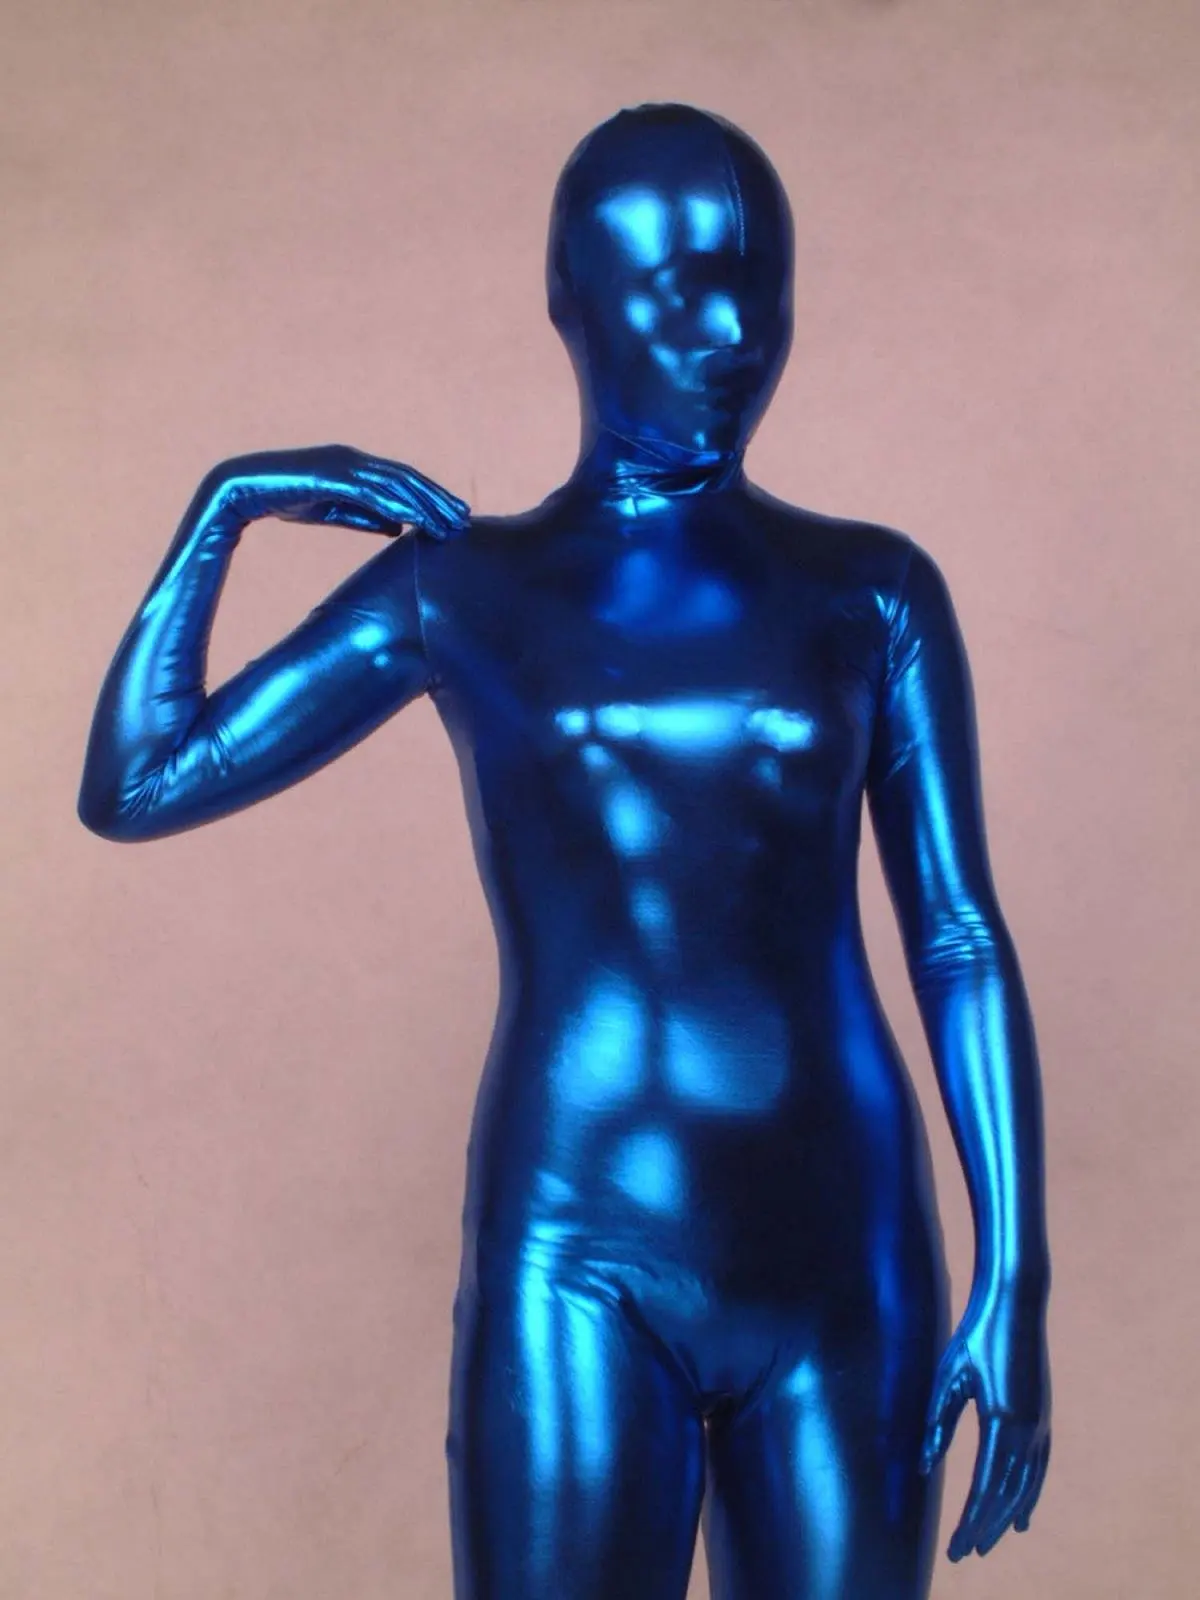 Blue Satin Full Covered Body Suit Spandex With Latex Zentai CatSuit S-xxl B...